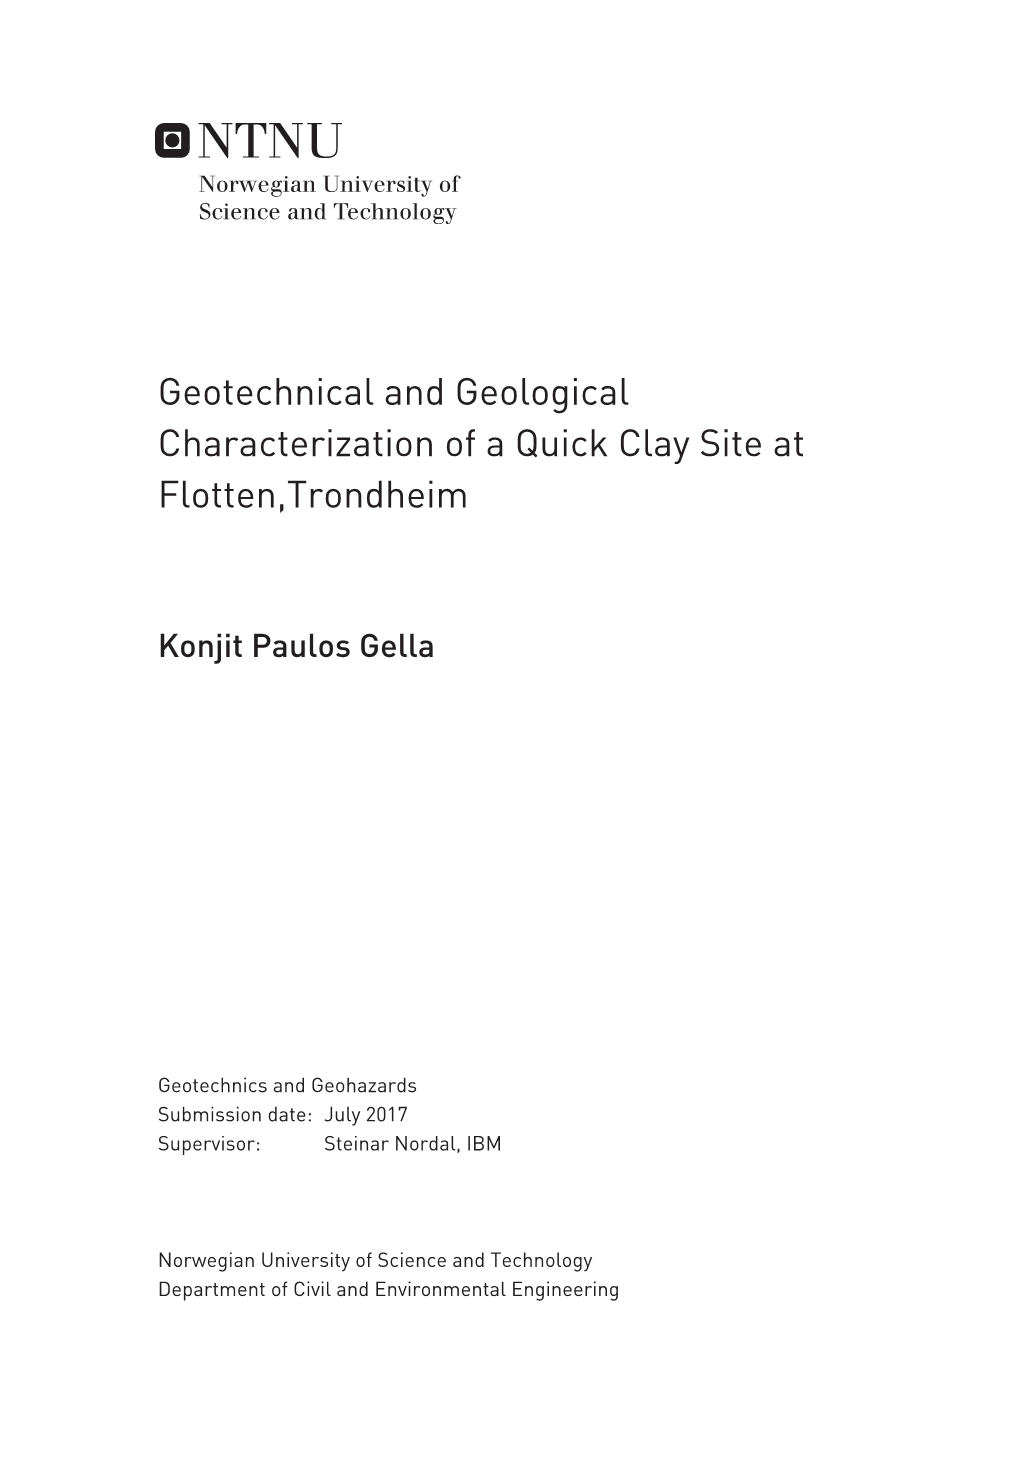 Geotechnical and Geological Characterization of a Quick Clay Site at Flotten,Trondheim